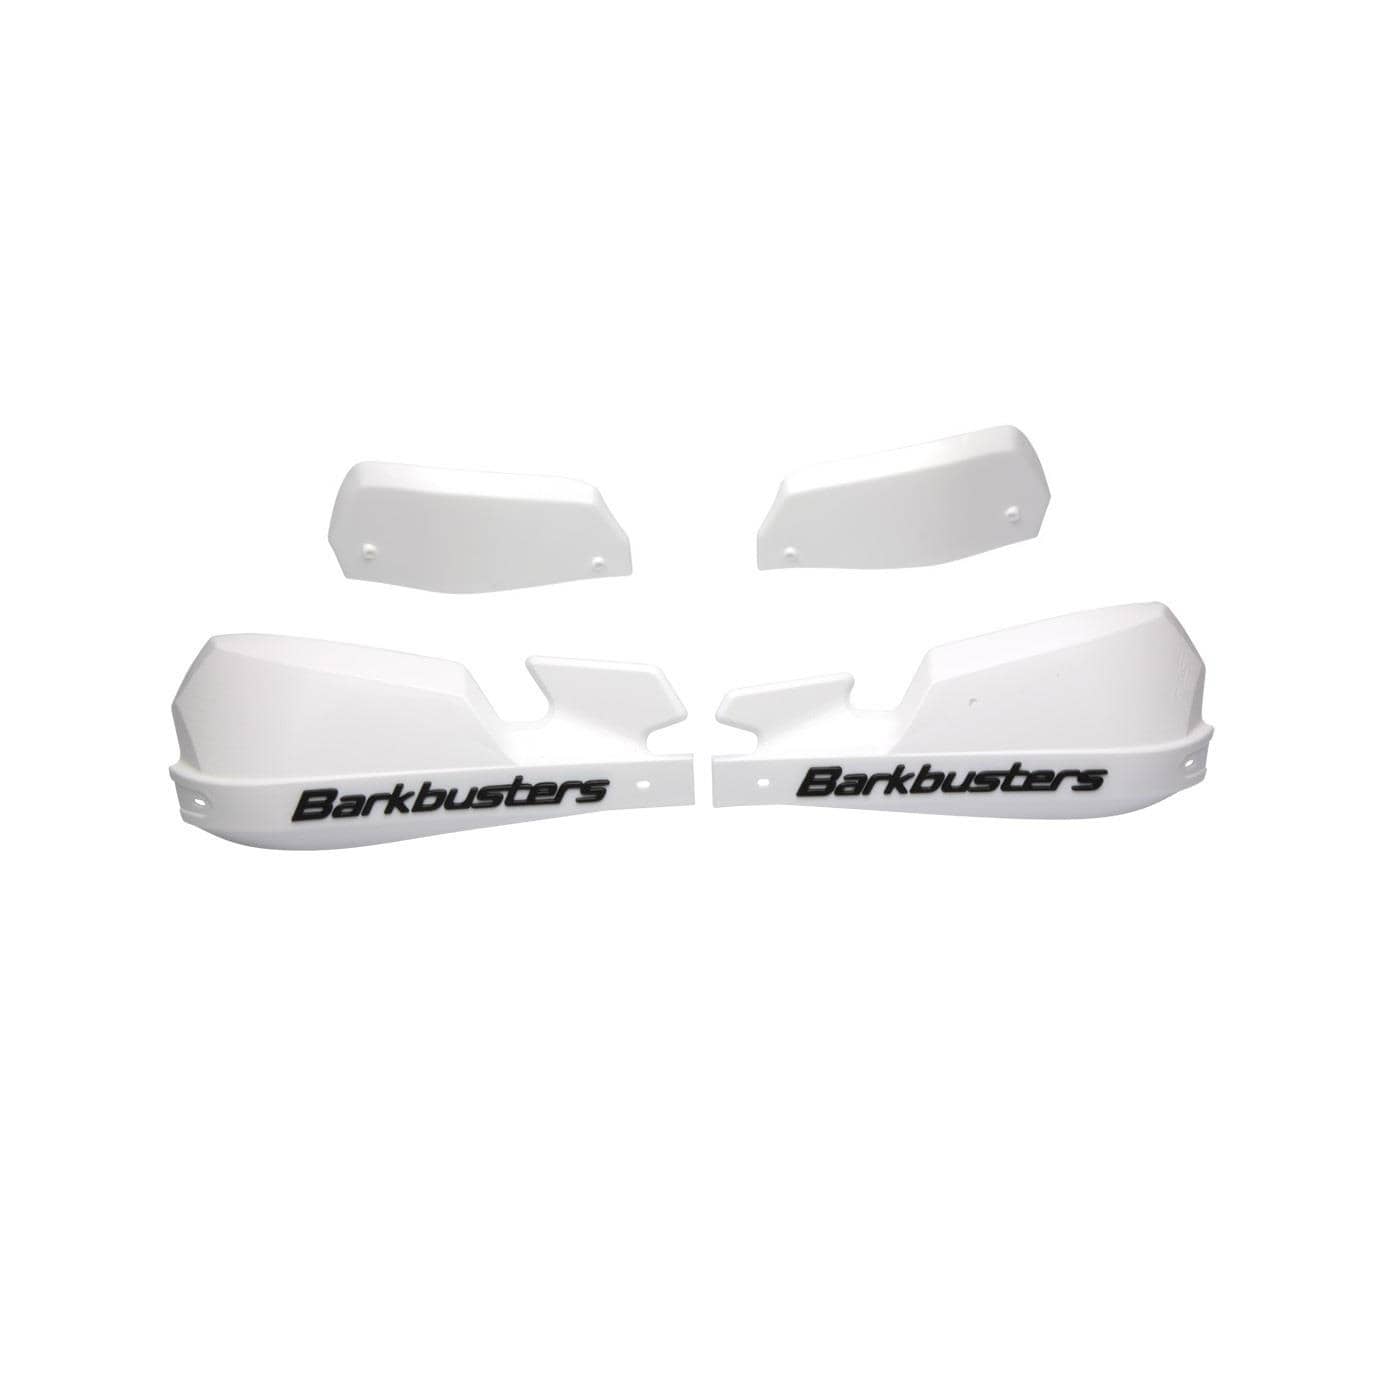 Barkbusters VPS Plastic Handguard -White with White deflectors